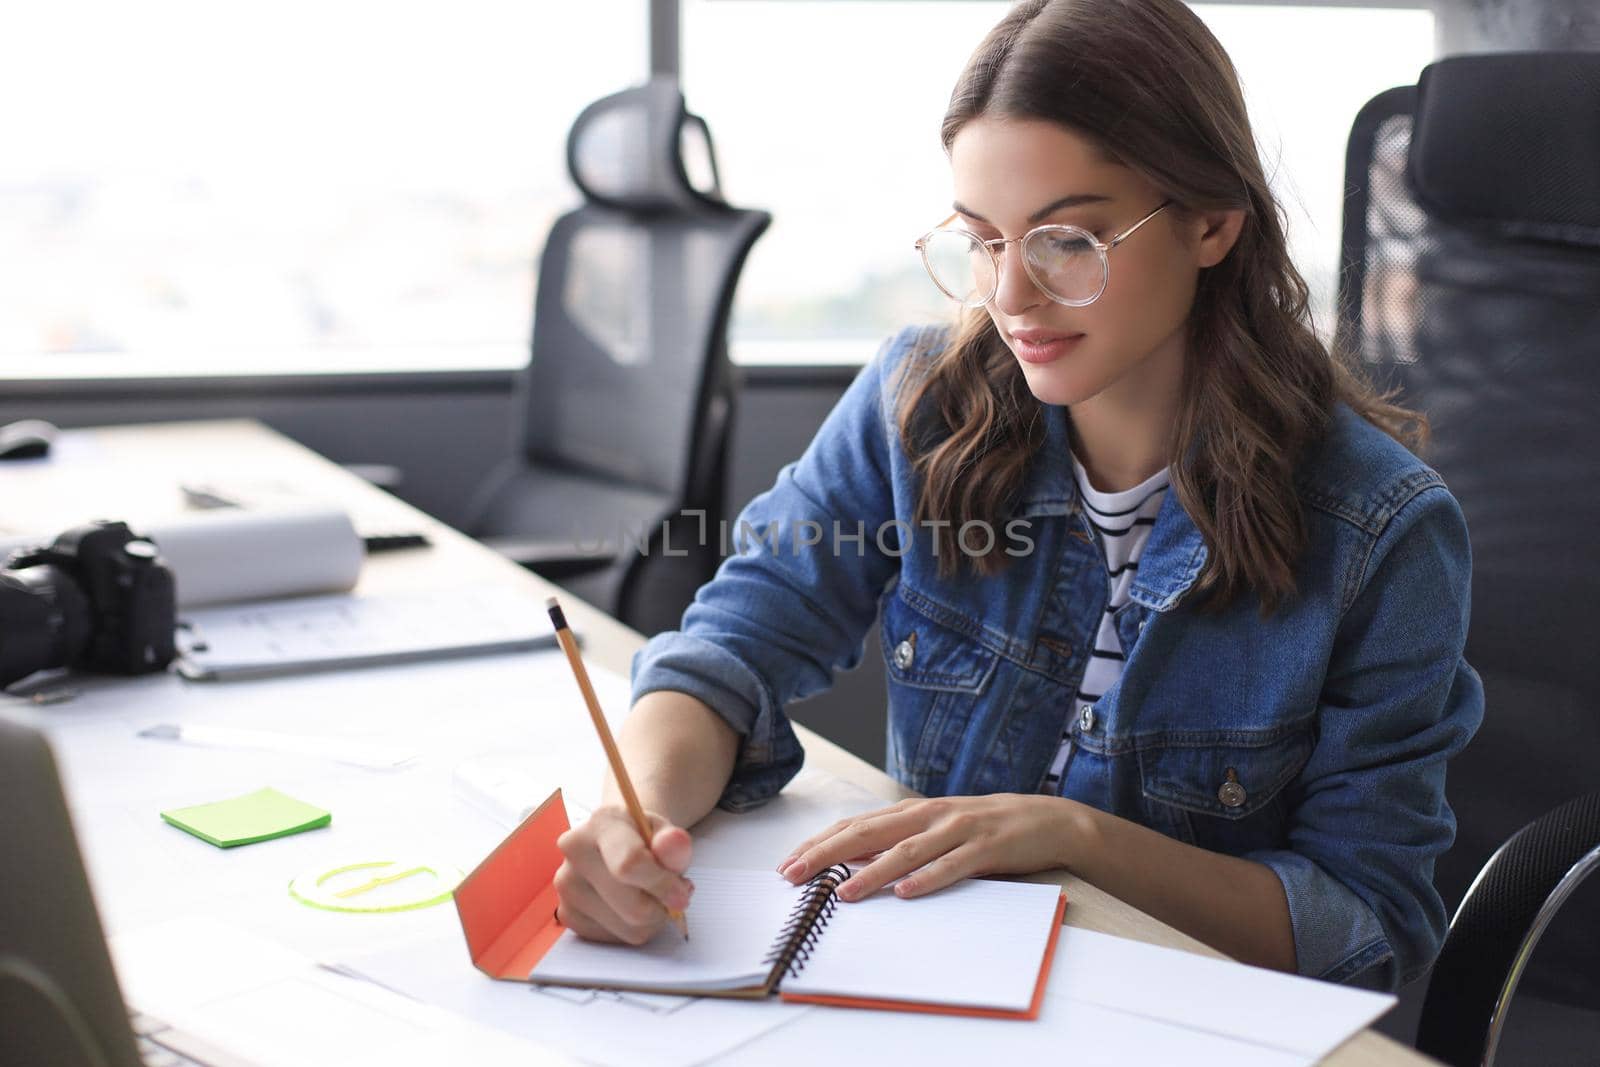 Concentrated young woman writing something down while working in the office